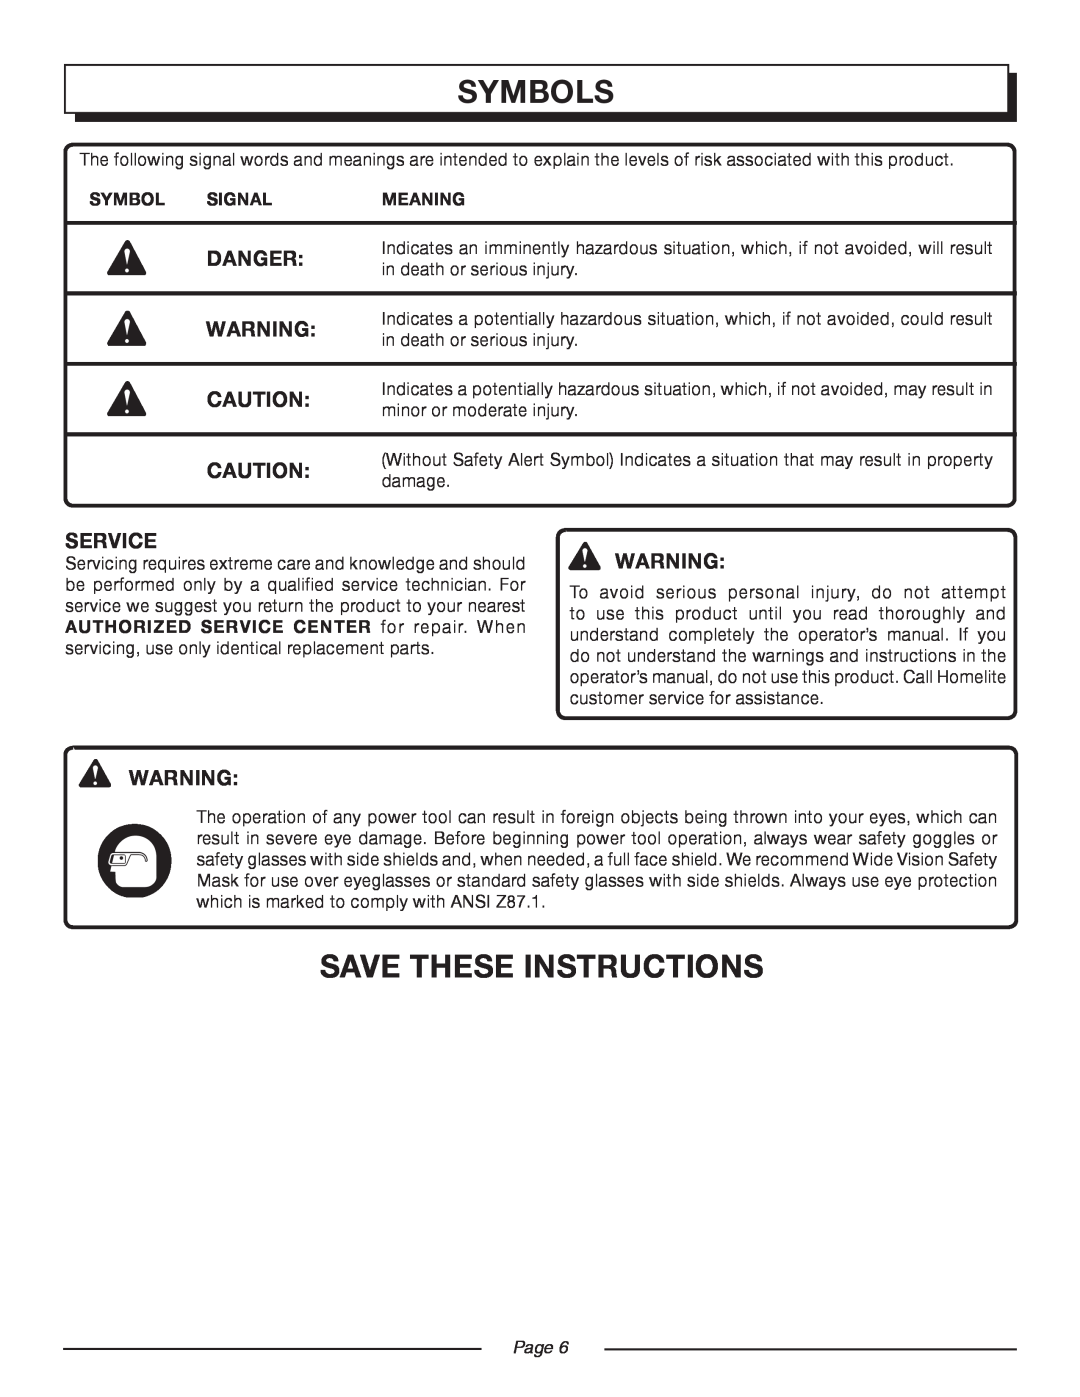 Homelite UT44160 manual Save These Instructions, Danger, Service, Symbols, Signal, Meaning, Page  